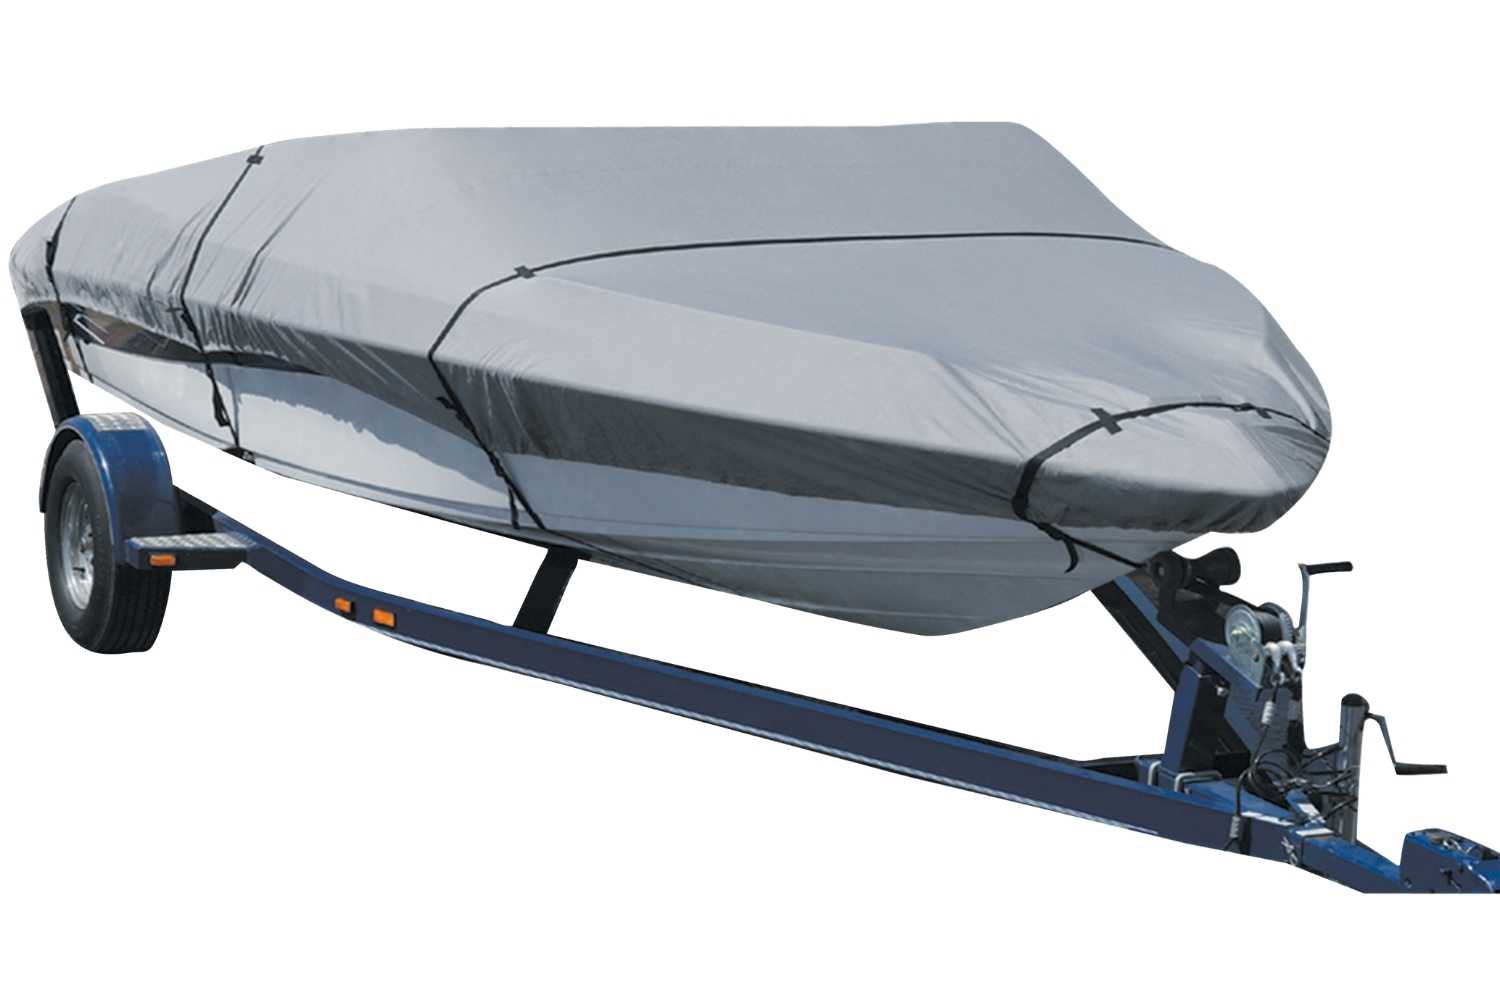 Grey boat cover on a trailer 